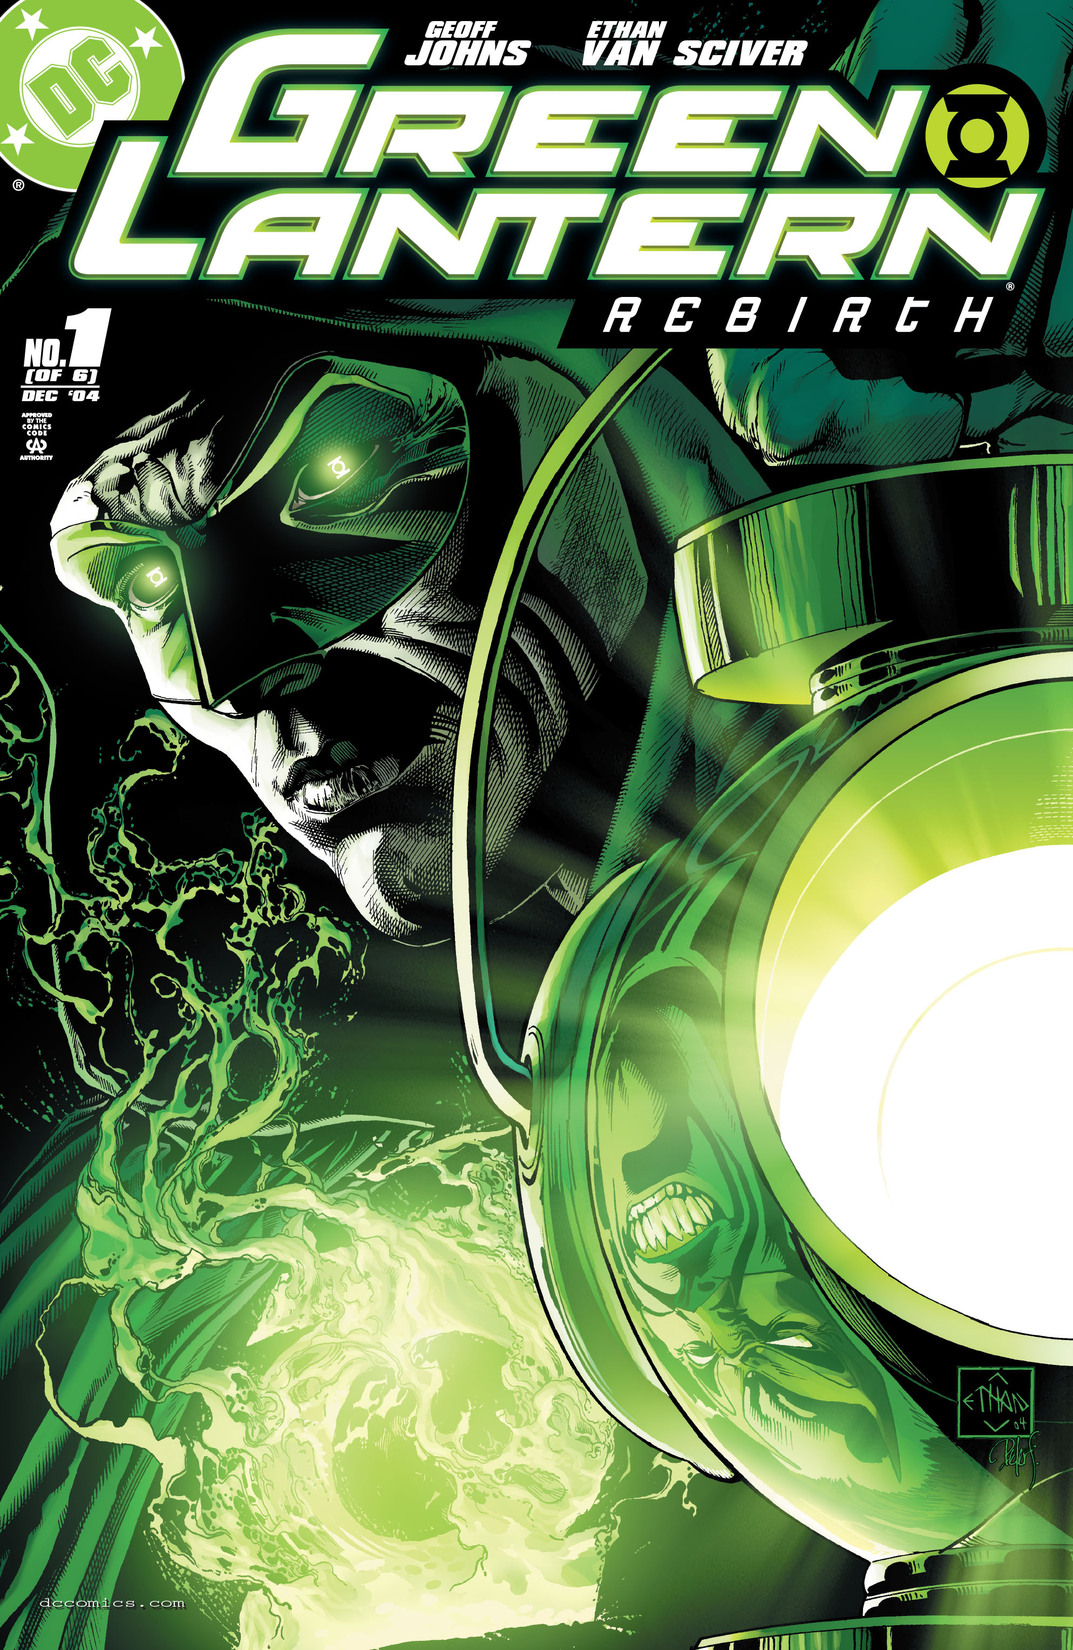 Green Lantern: Rebirth #1 preview images